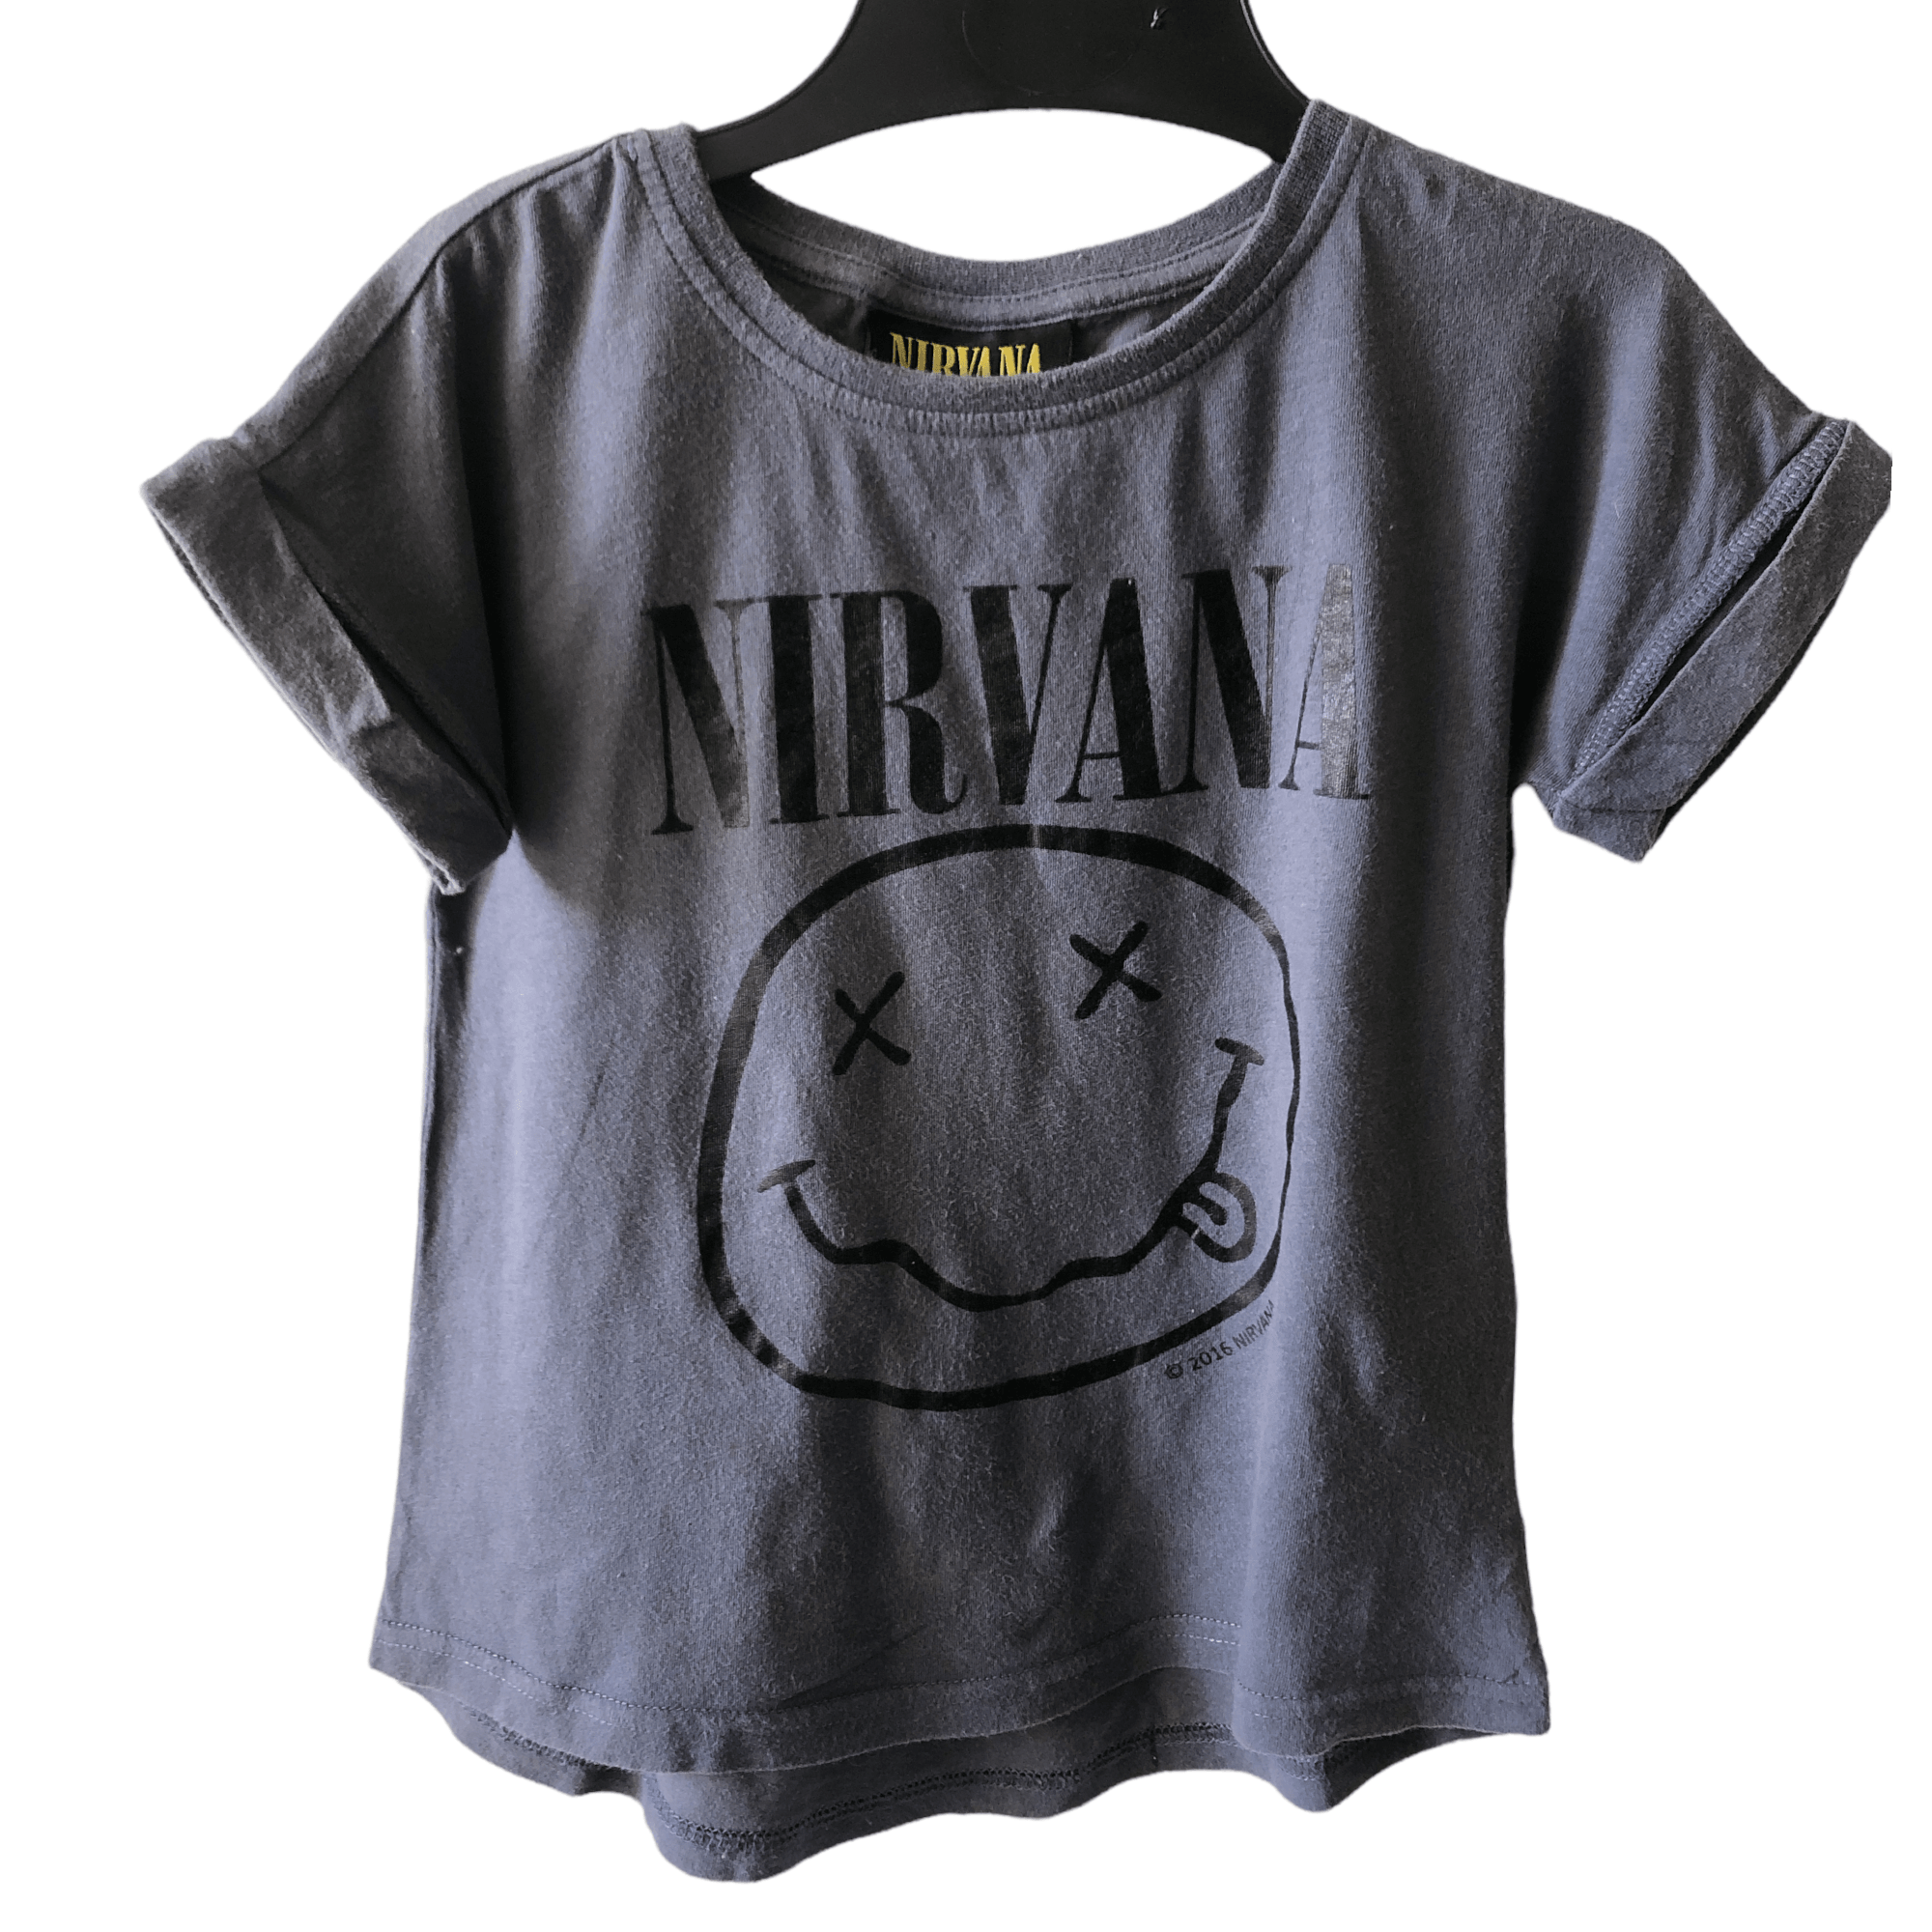 Pre-Owned Cotton On - Charcoal T-Shirt Nirvana (Age 4) The Re-Generation